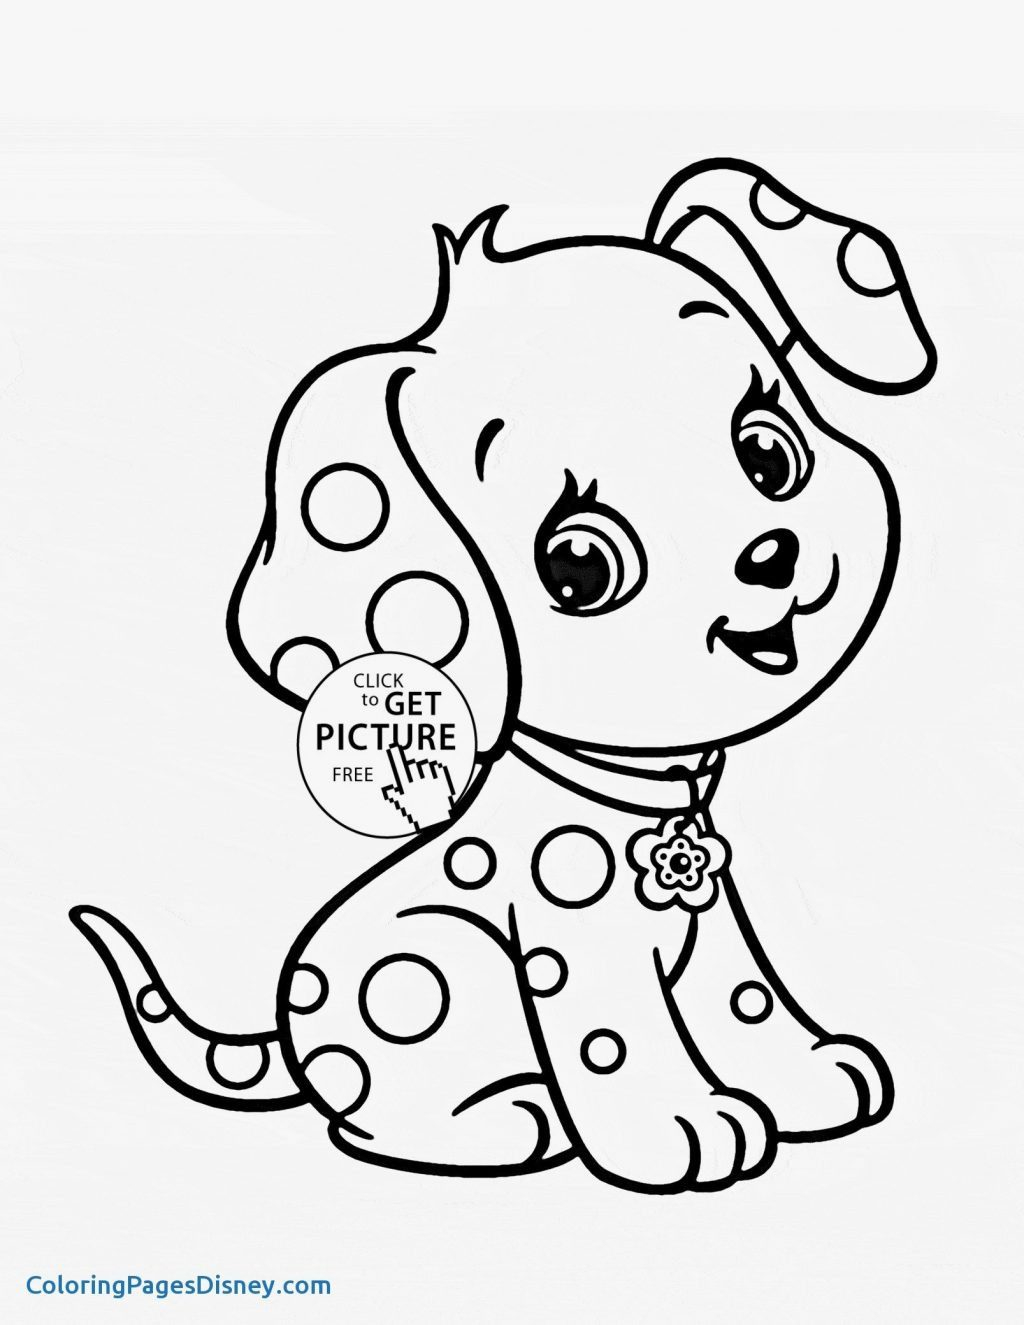 Disney Color Pages Free Coloring Arts Fantastic Simple Disney Coloring Pages Free Disney